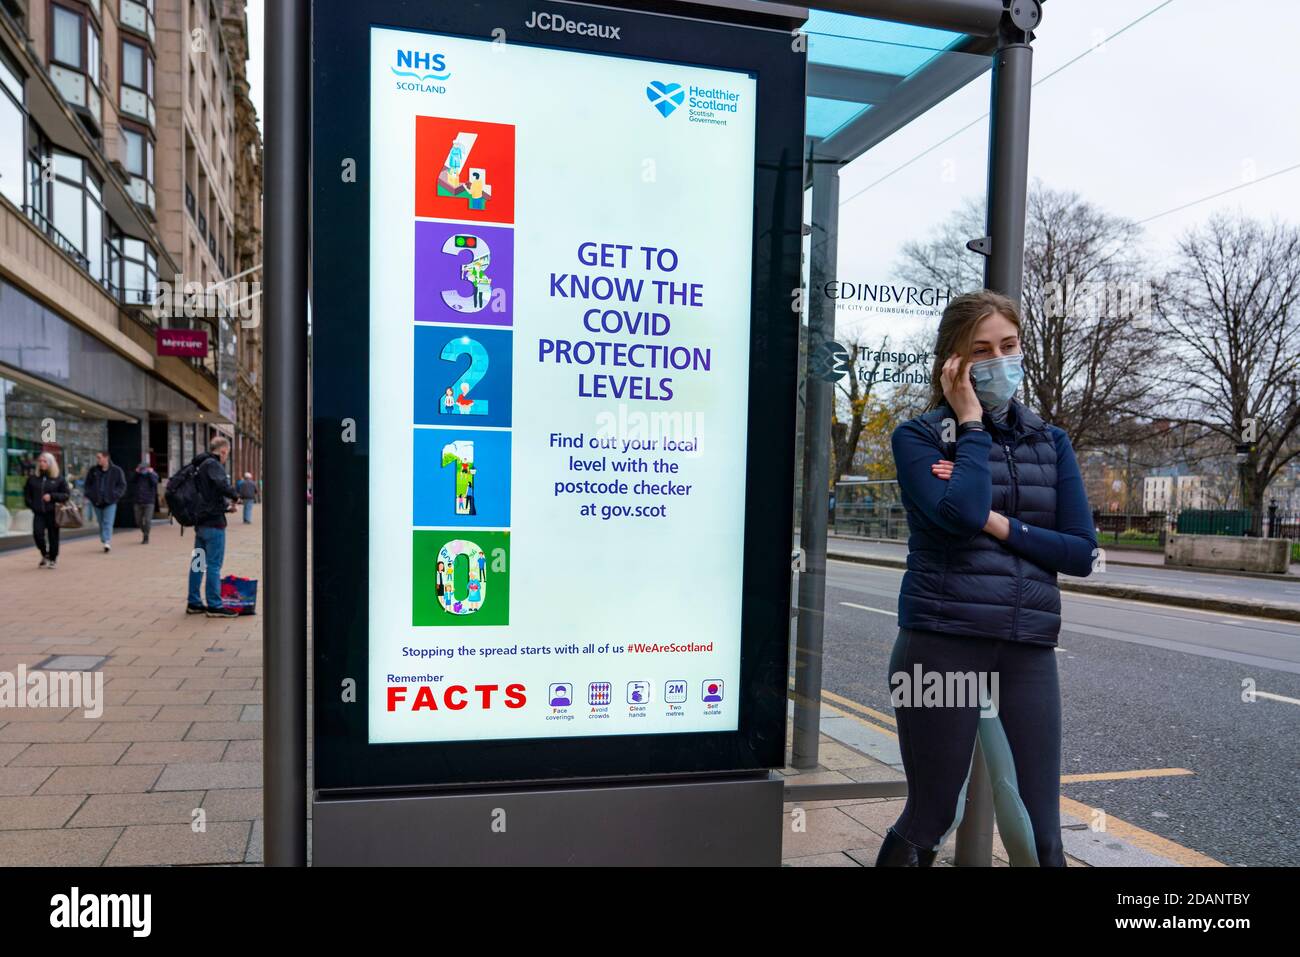 Edinburgh, Scotland, UK. 14 November 2020. Views of Edinburgh city centre on Saturday afternoon during a level 3 lockdown imposed by the Scottish Government;.Pictured; Coronavirus health advisory notices on video displays on bus shelters. Iain Masterton/Alamy Live News. Stock Photo